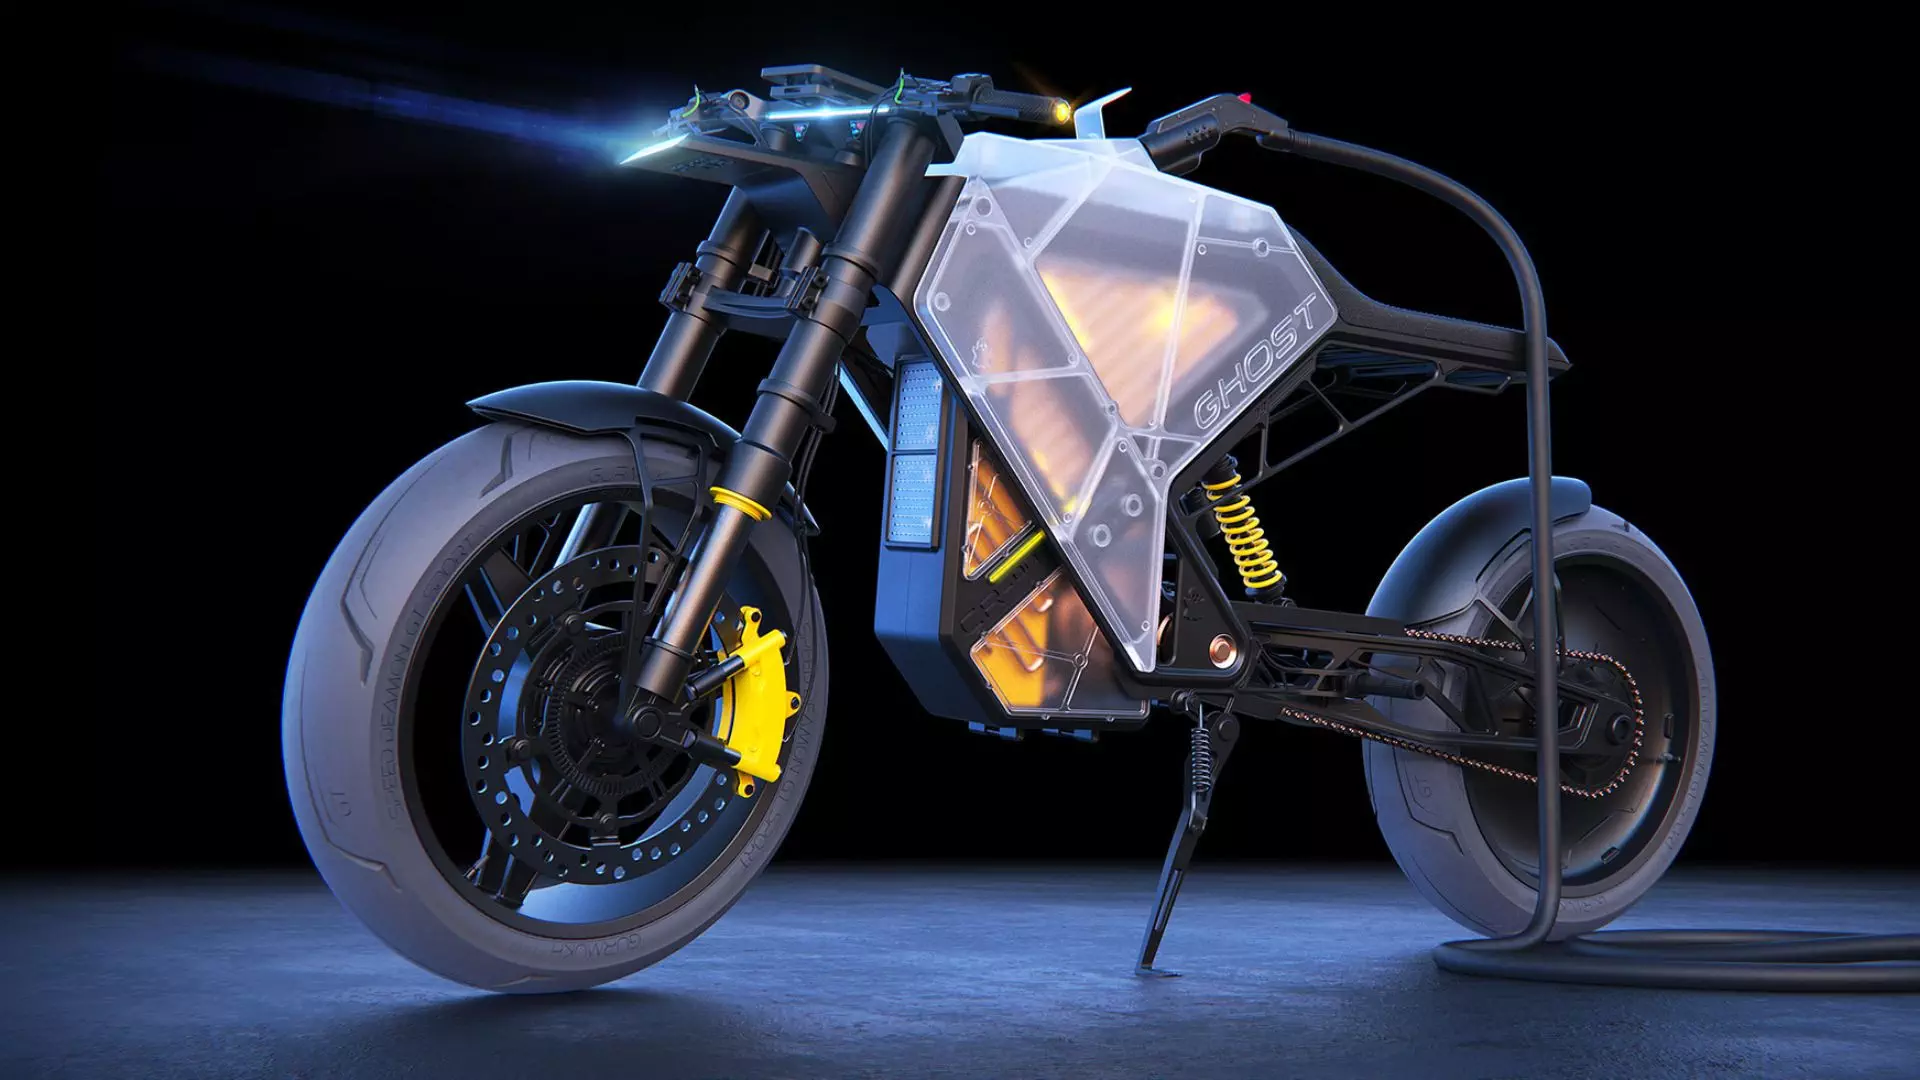 The CR-Dos - Ghost concept motorcycle in all its glory